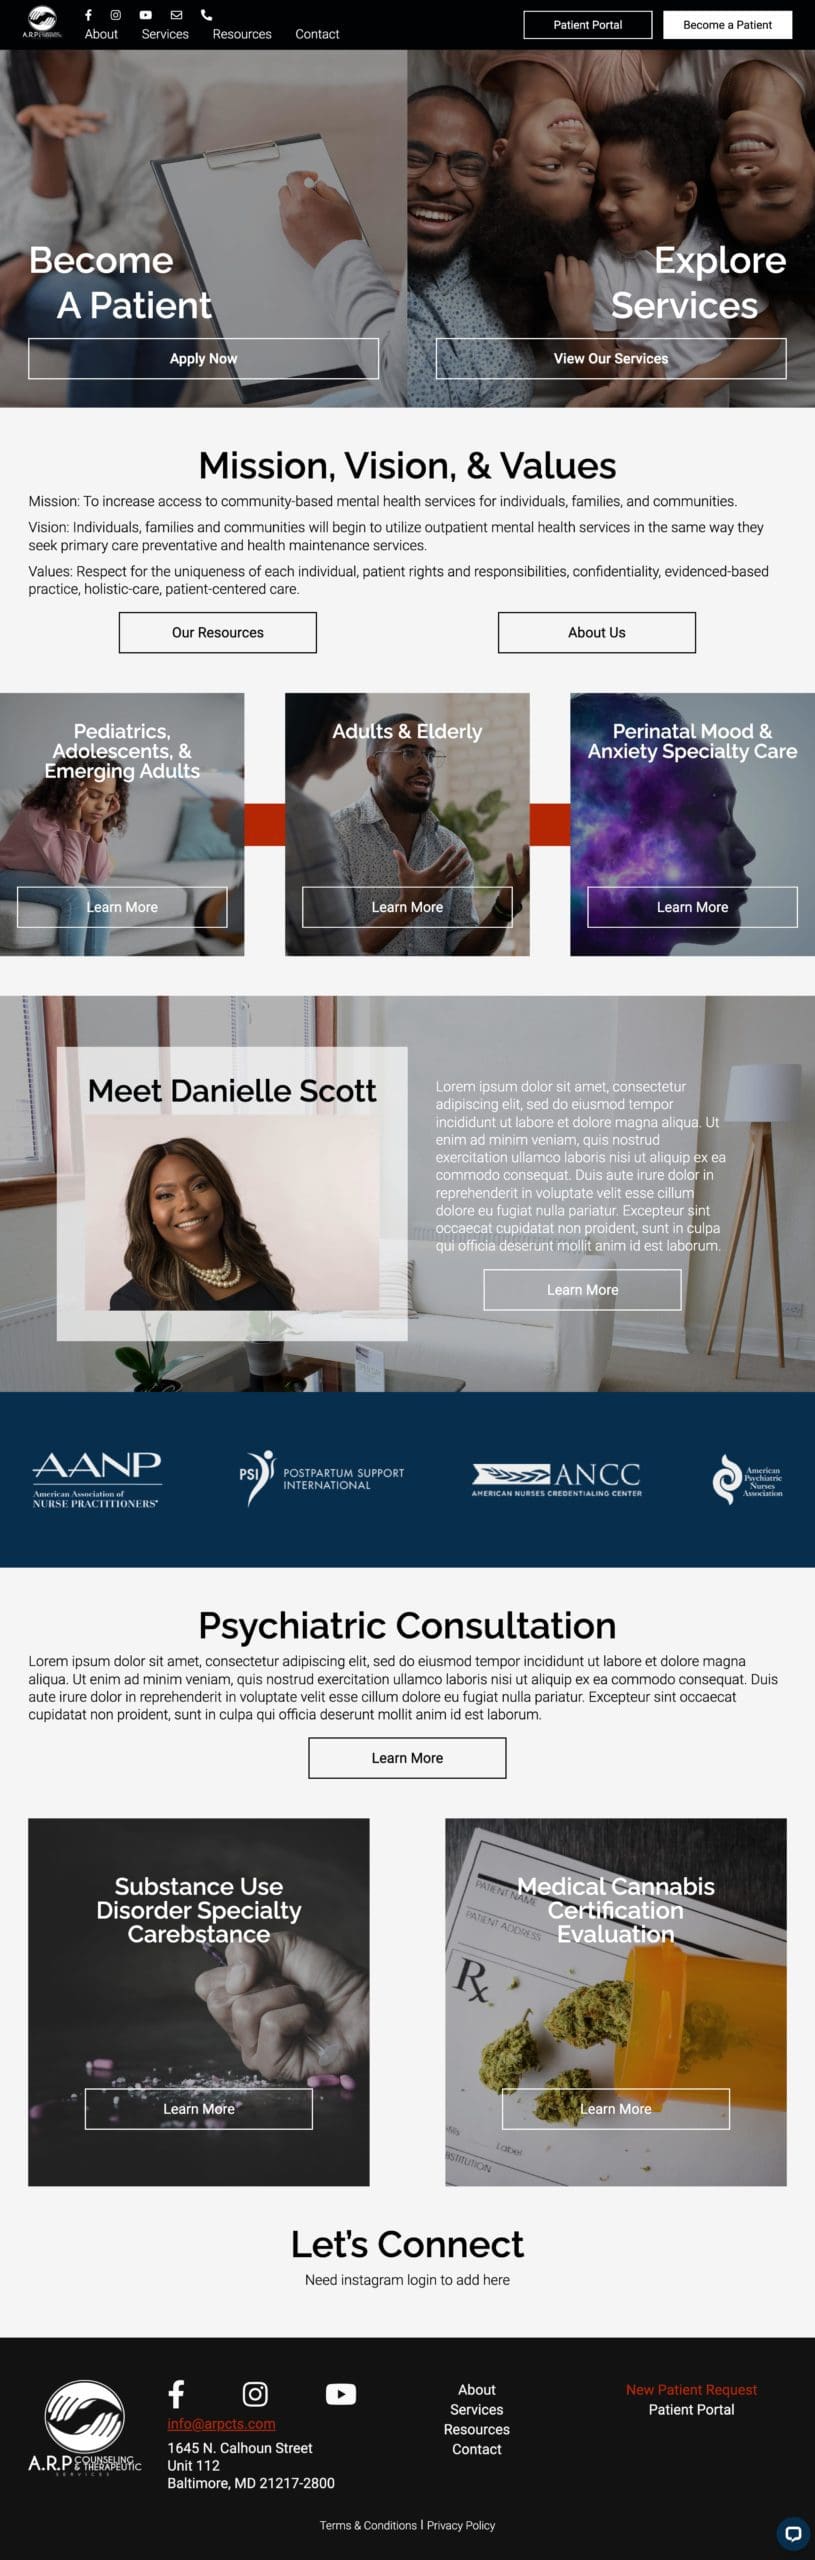 arp counseling website example